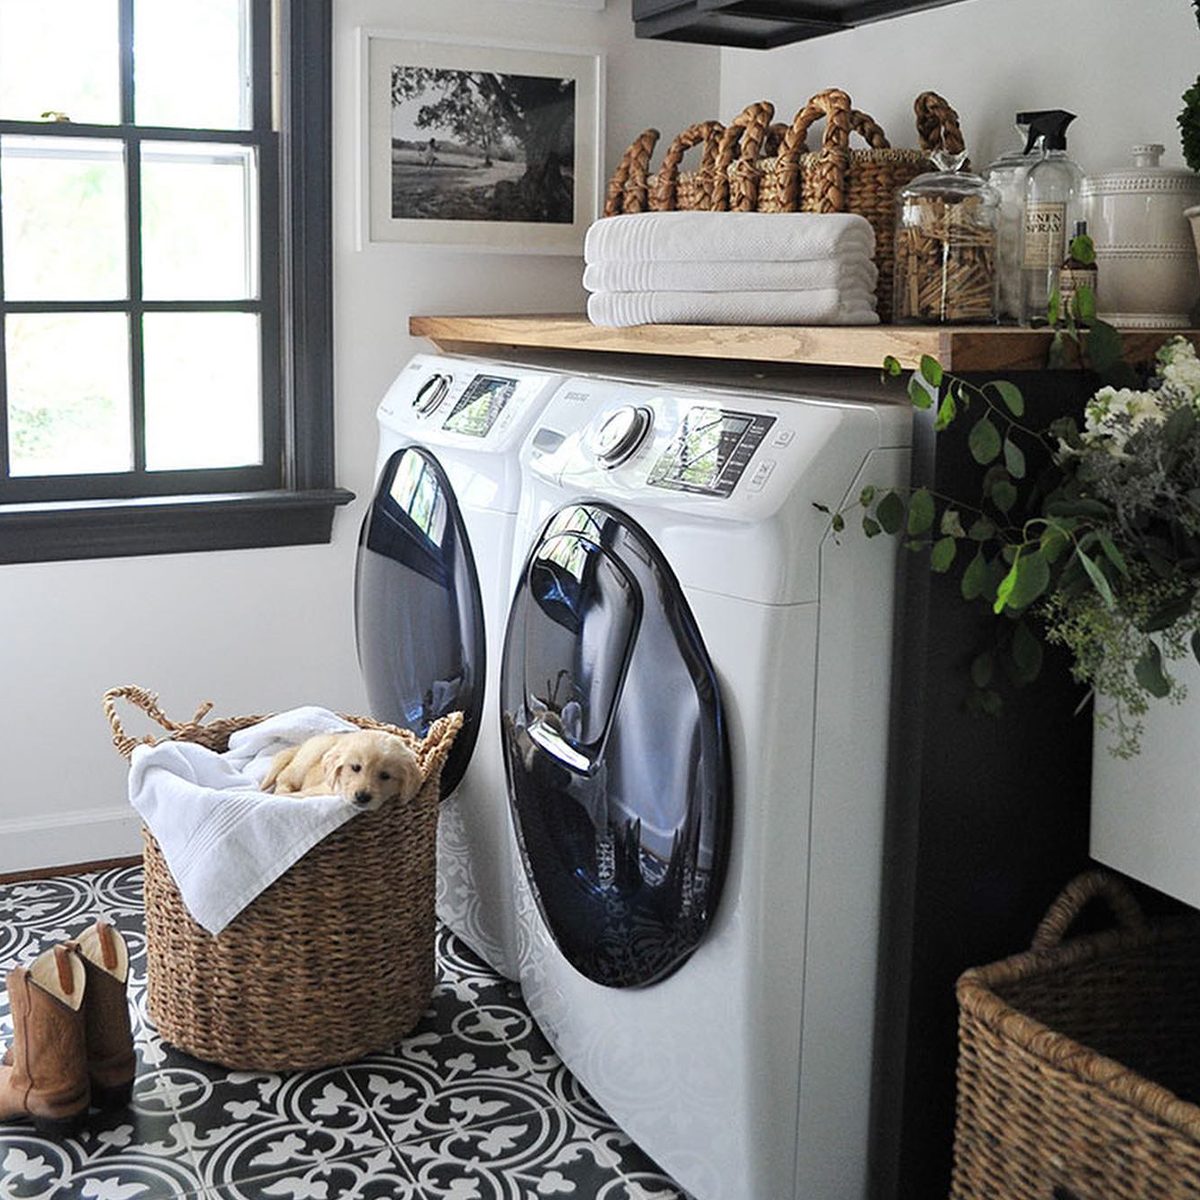 10 Laundry Room Countertop Ideas You'll Love Rustic Wood Courtsey @dearlillie Instagram